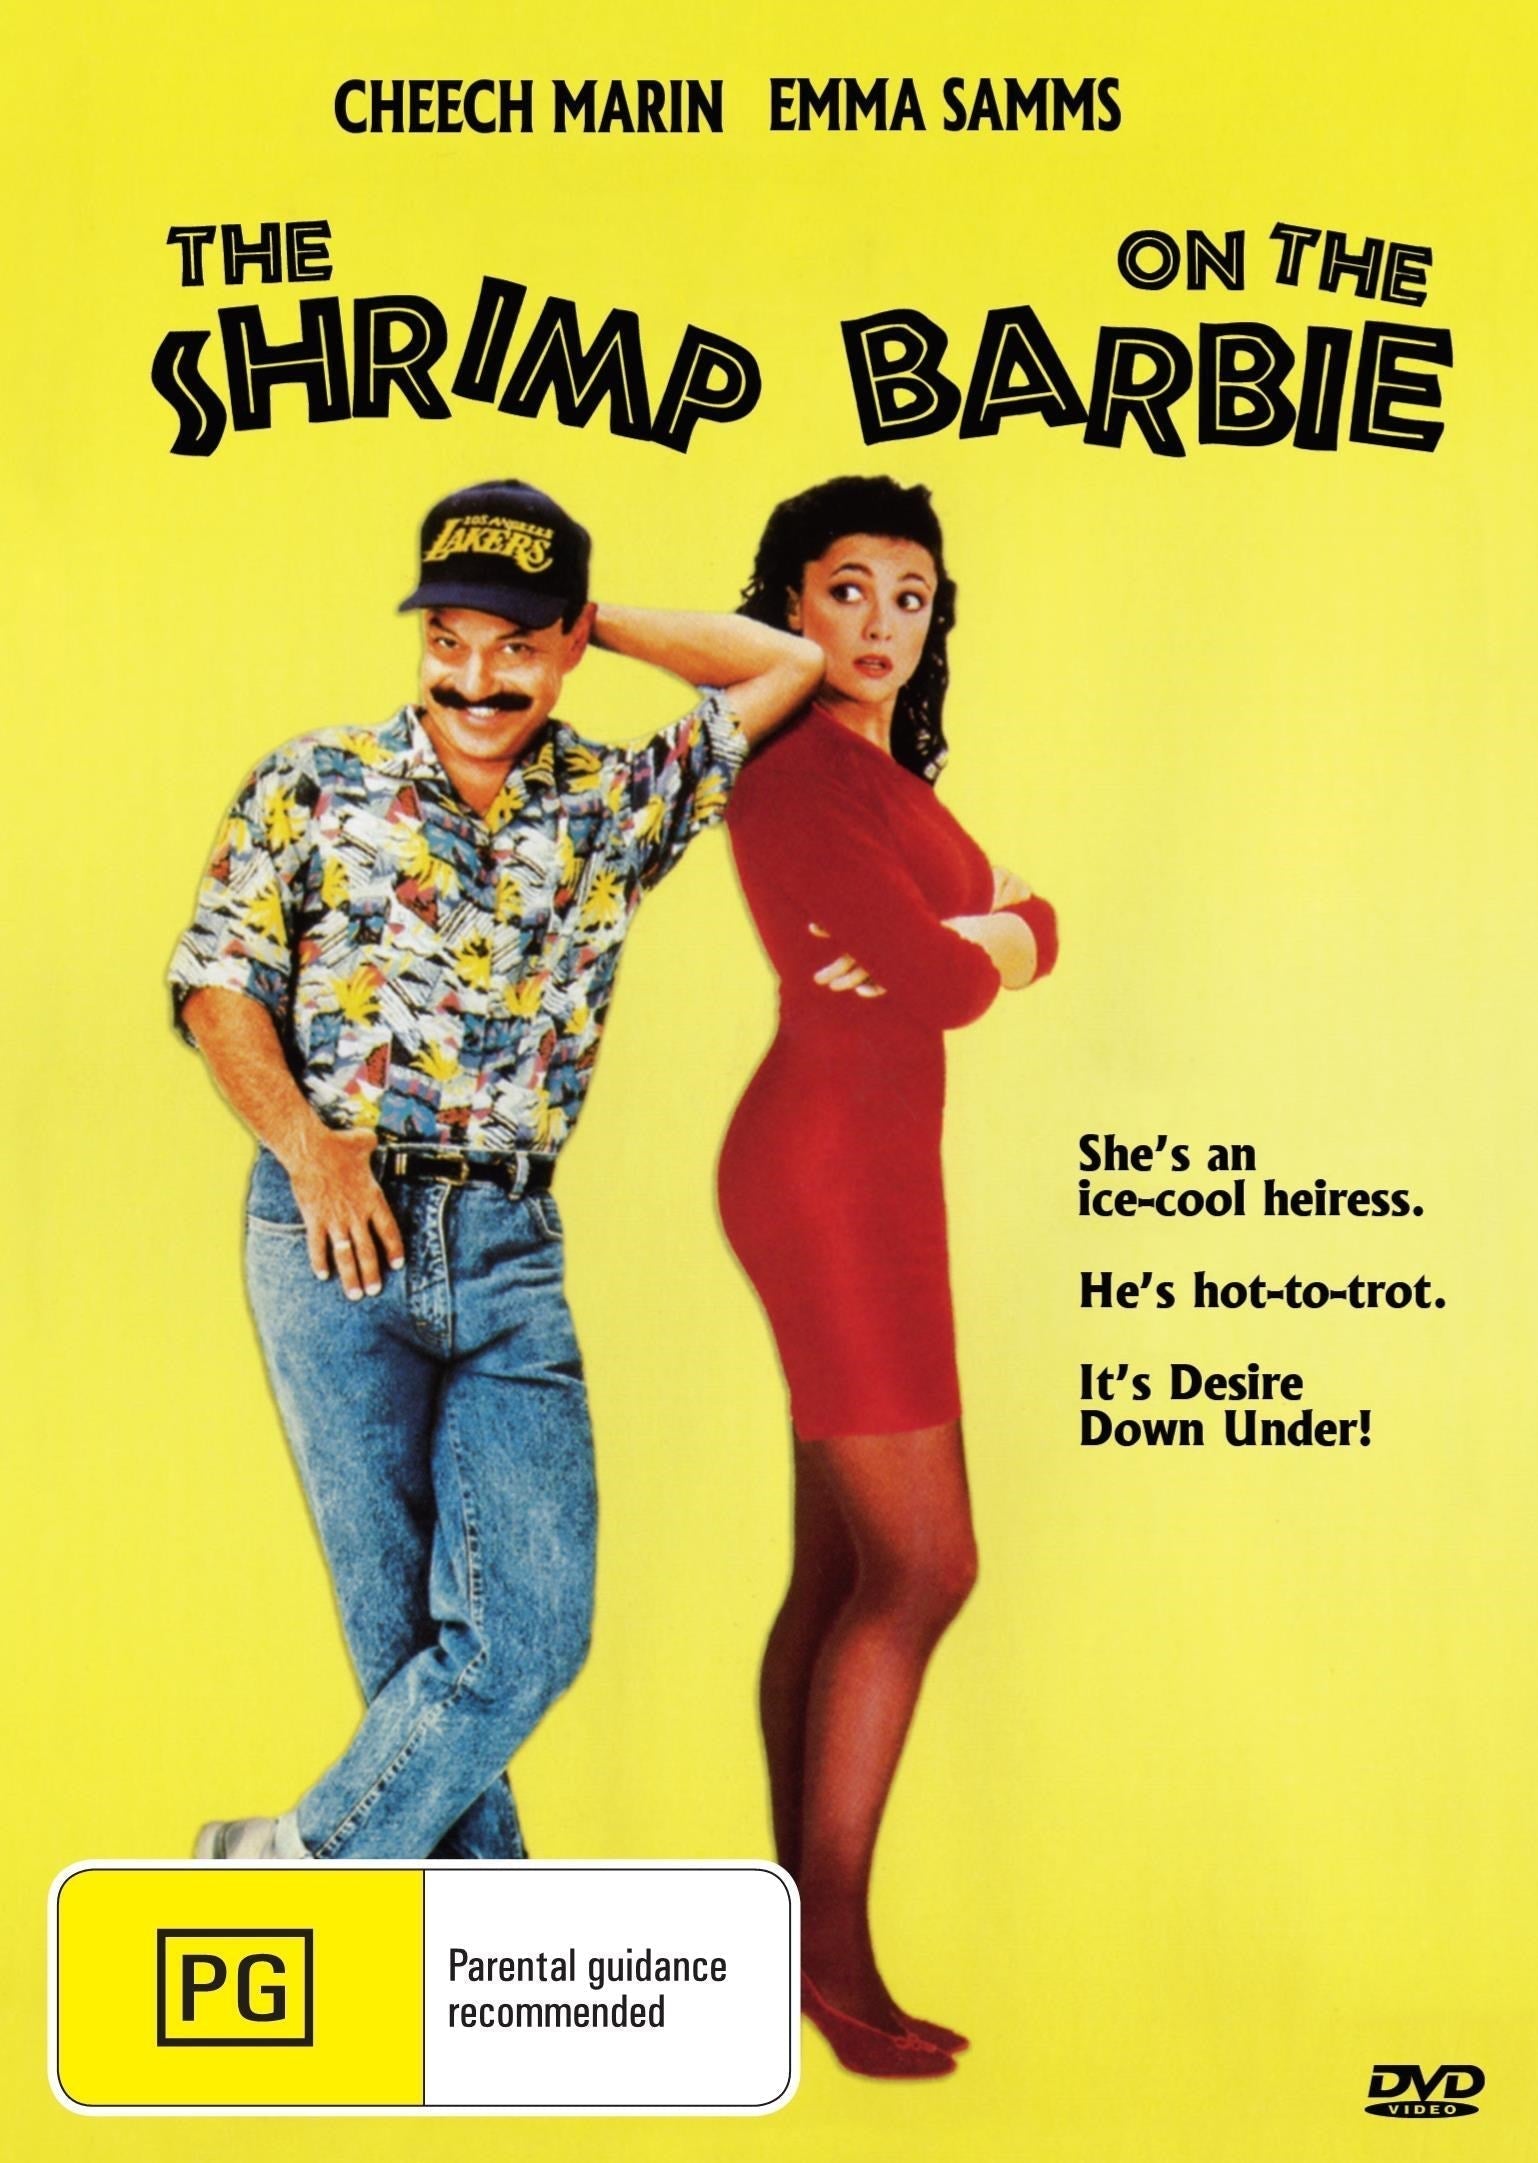 The Shrimp On The Barbie rareandcollectibledvds